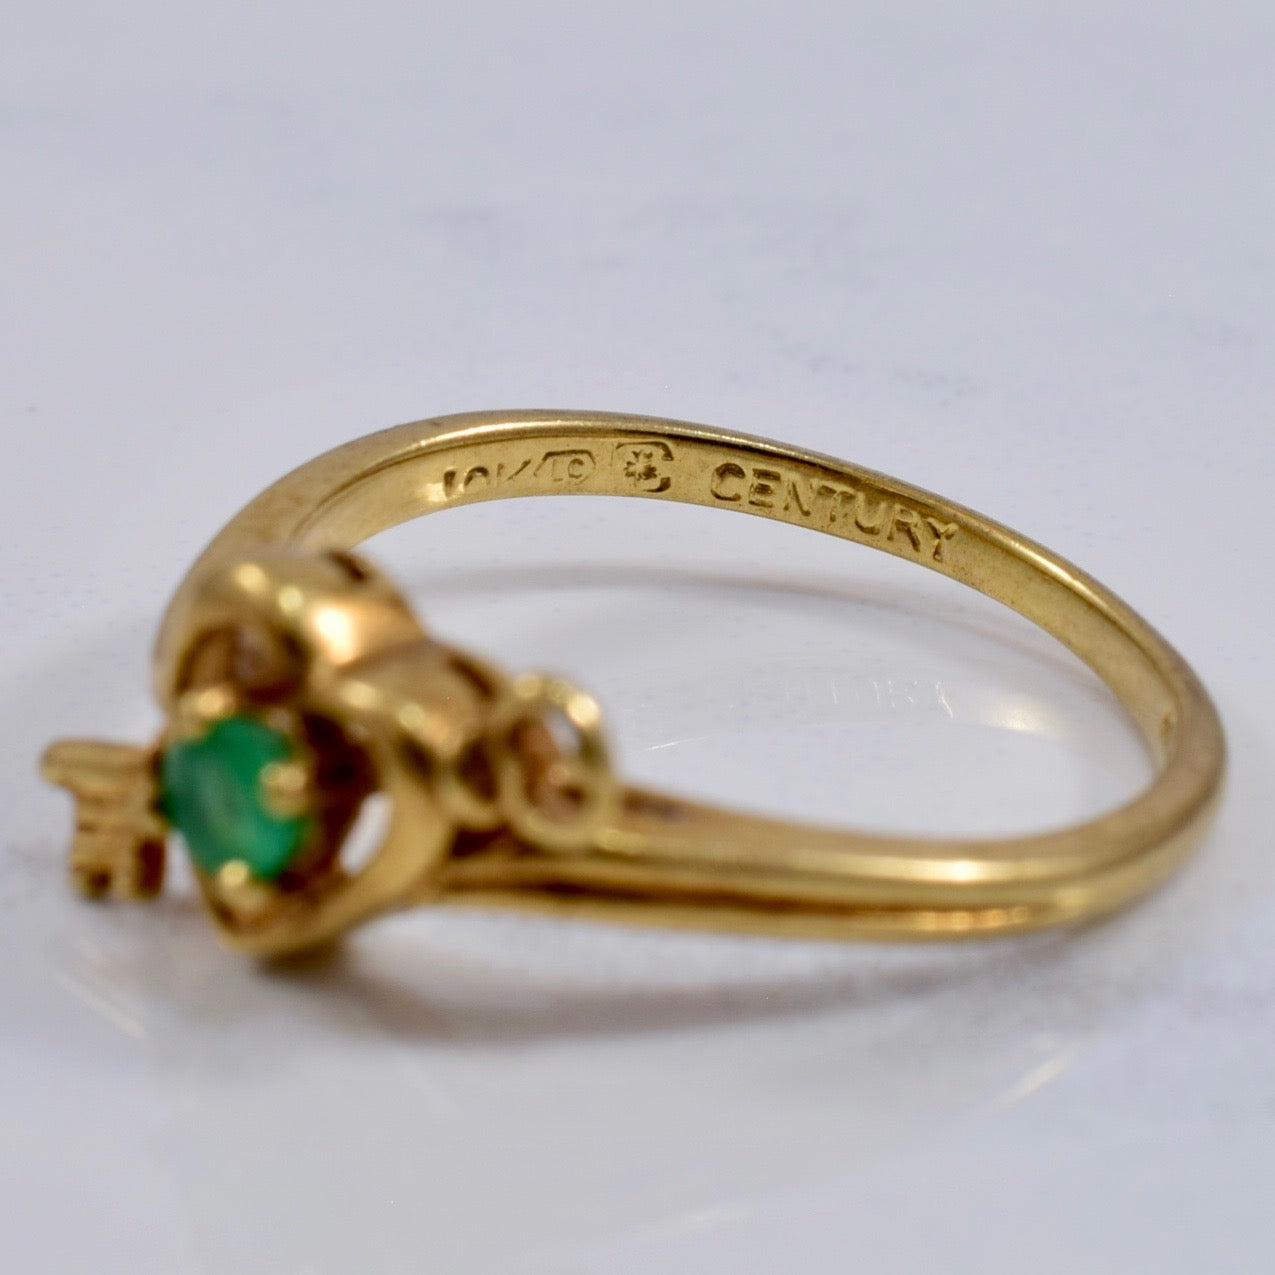 Key To My Heart Ring with Emerald | 0.06 ct SZ 4.5 |